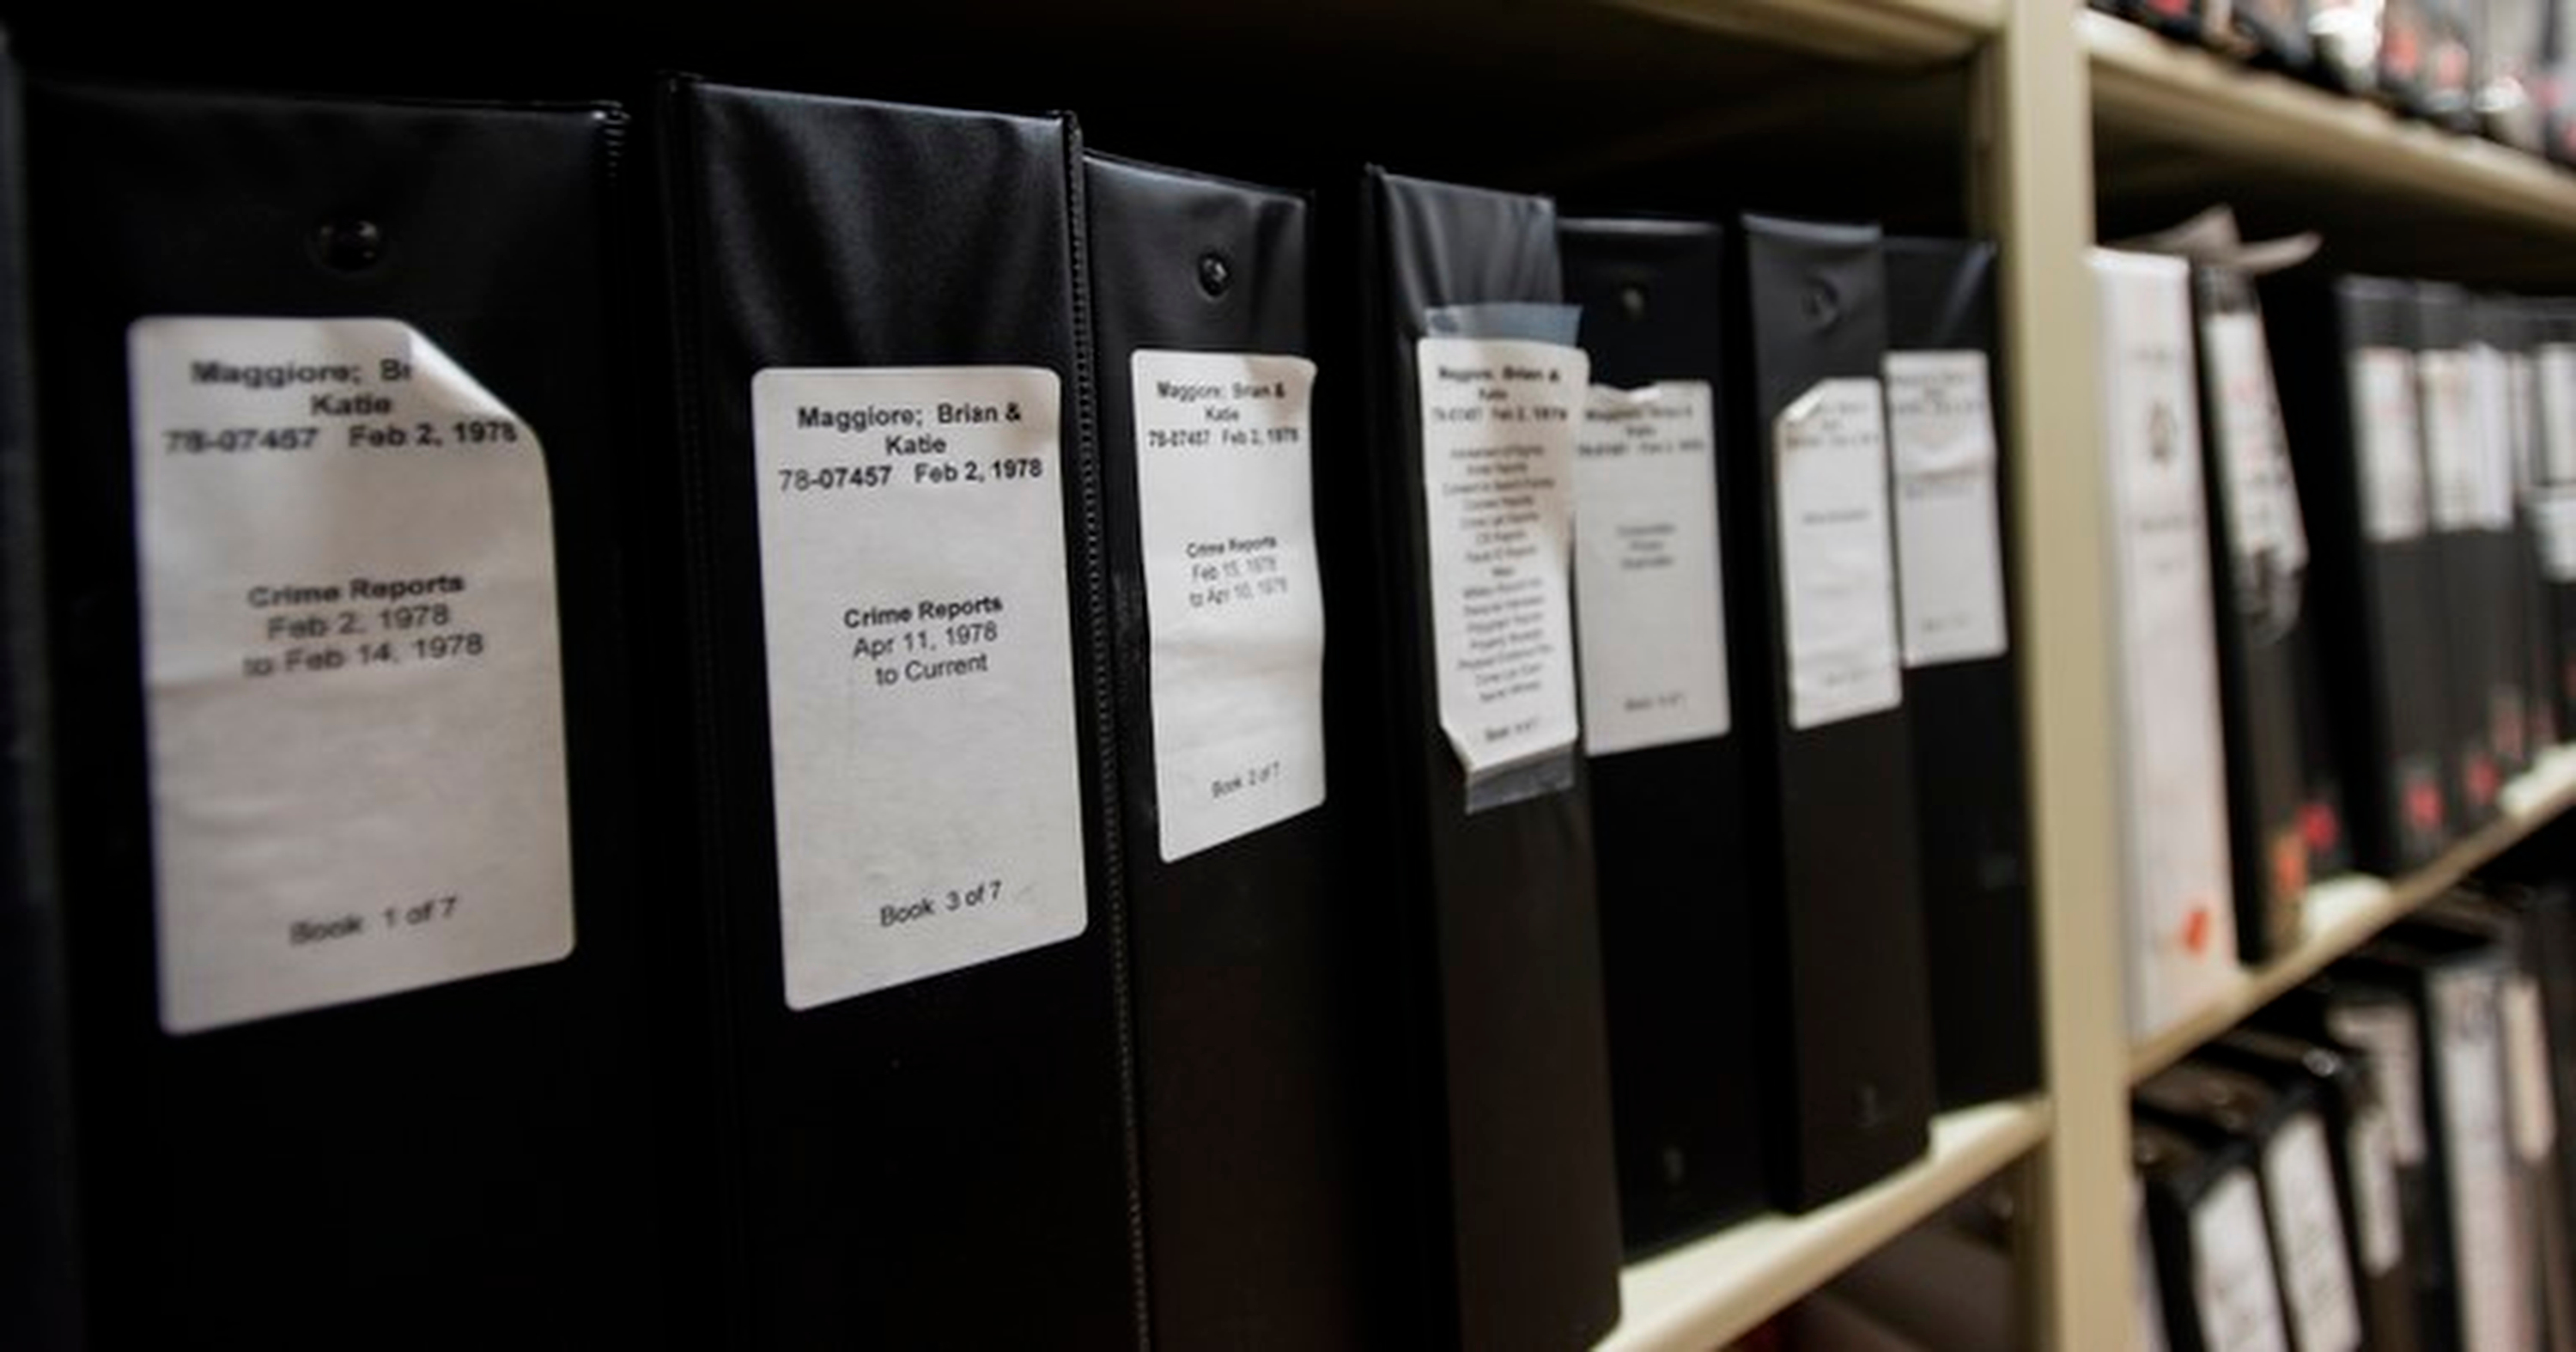 Part of the East Area Rapist crime reports at the Sheriff's department evidence room in Sacramento, California (FBI via AP)